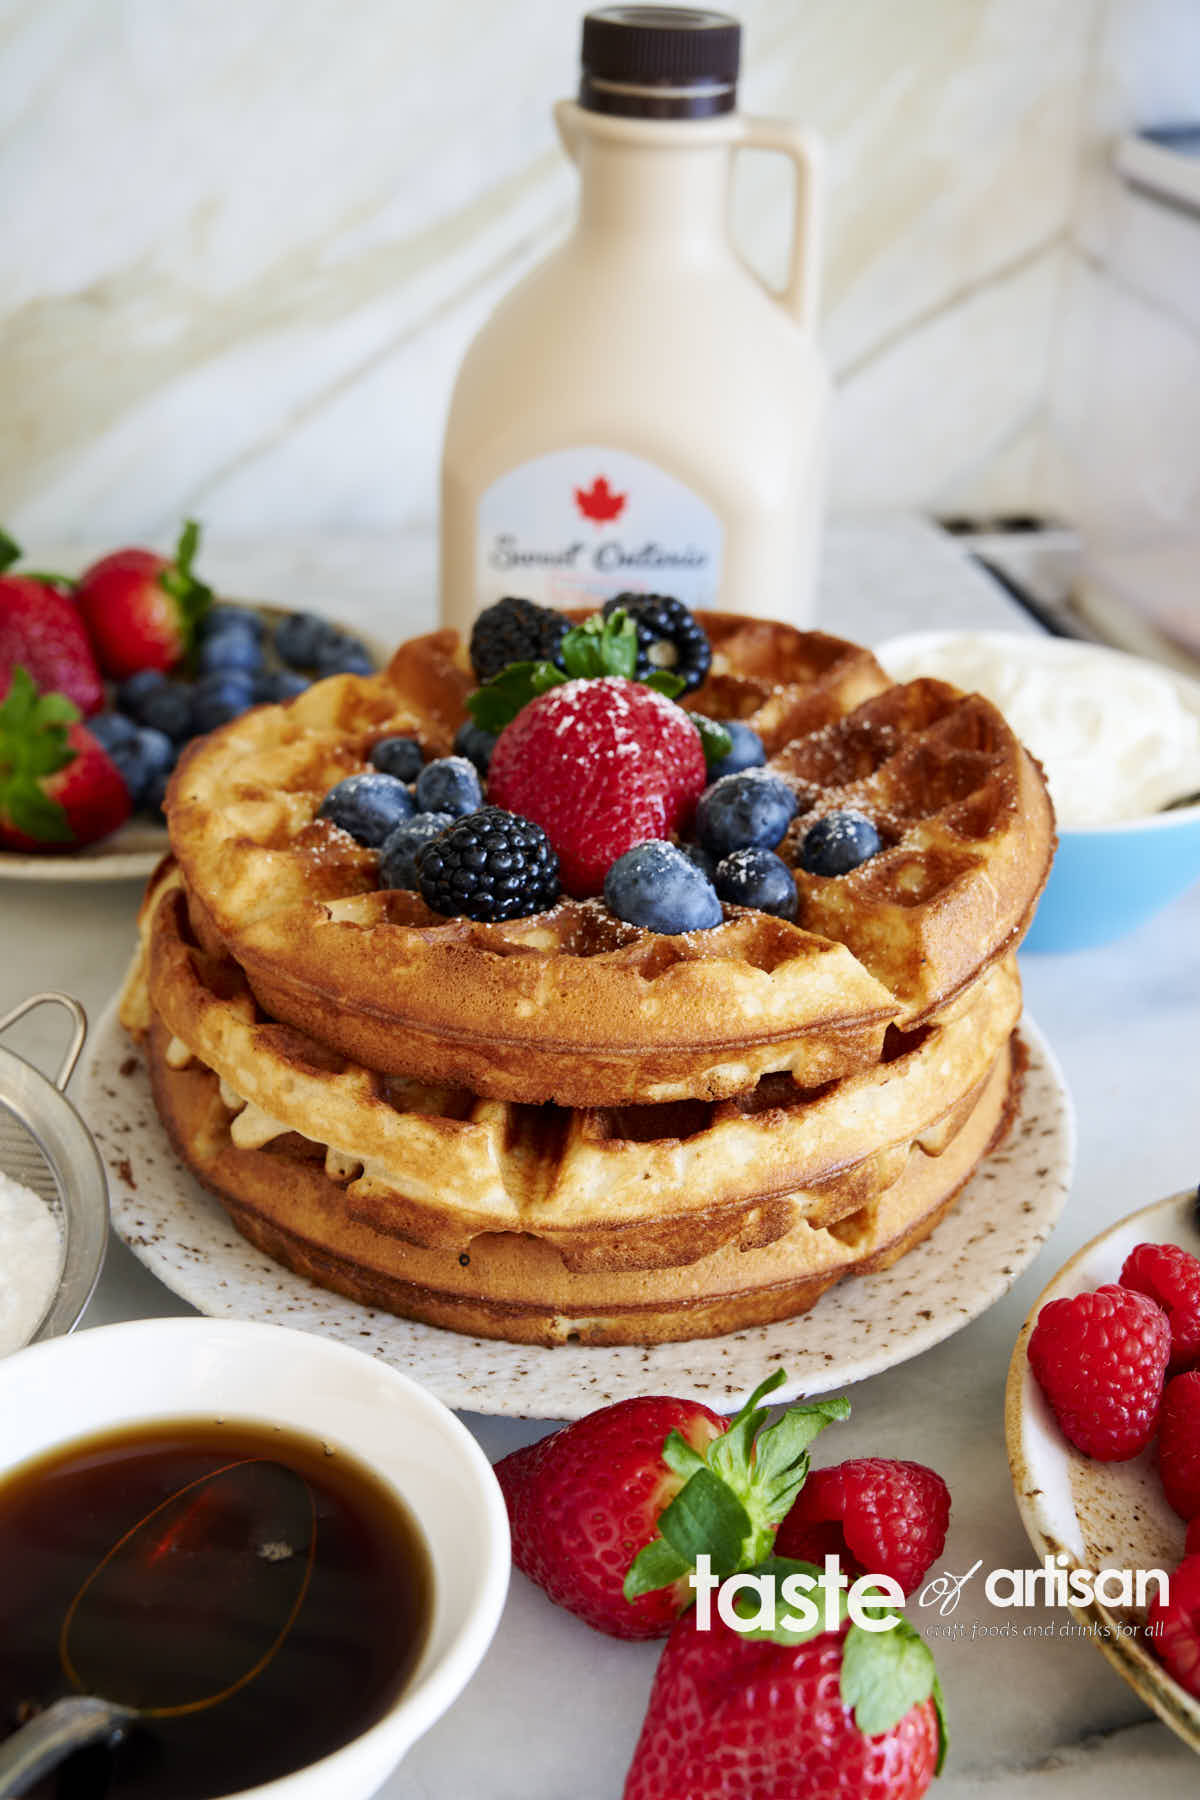 Sourdough Discard Waffles - Extra light and airy due to high hydration batter, extra crispy on the outside, and exceptionally flavorful and tasty with pleasant tartness from useing sourdough discard. 